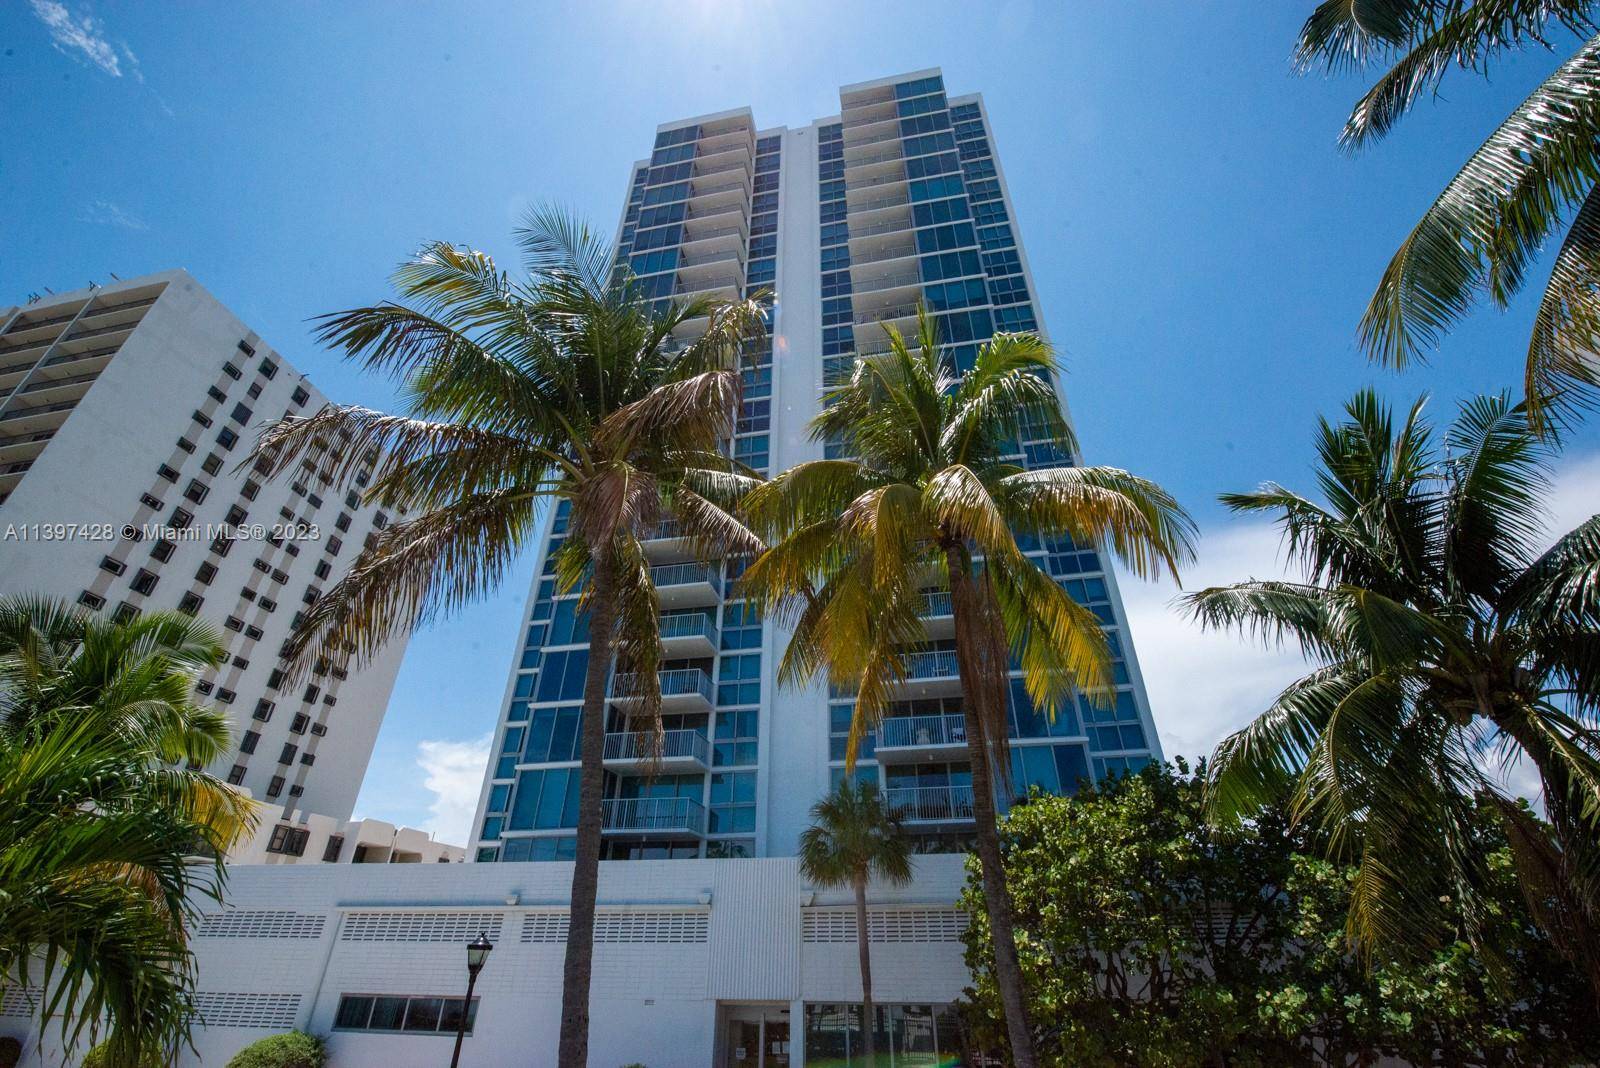 Beautiful Unit on the 8th floor at the Mirasol Ocean Tower, Remodeled with high end finishes.